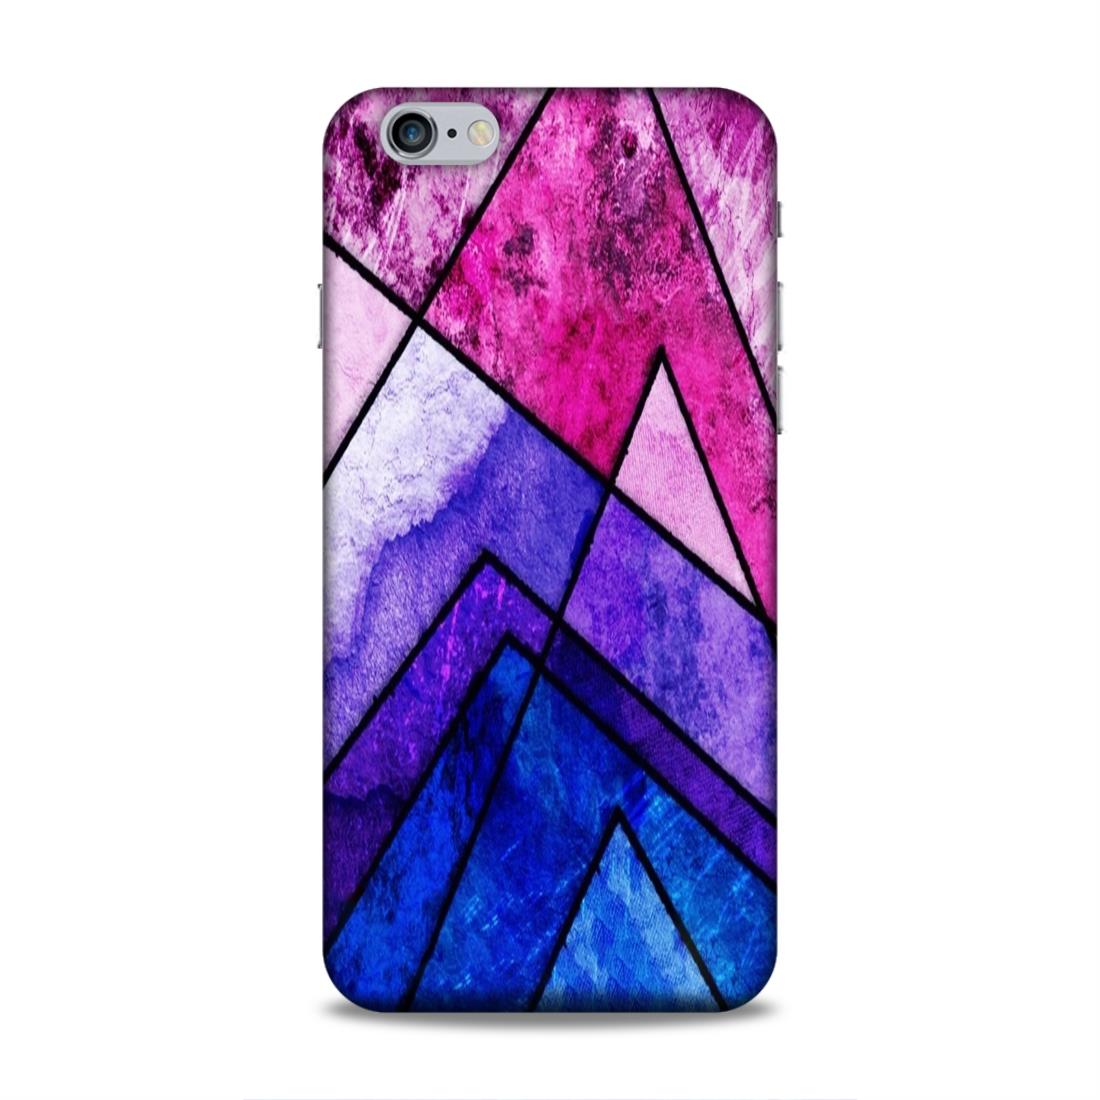 Blue Pink Pattern Hard Back Case For Apple iPhone 6 Plus / 6s Plus